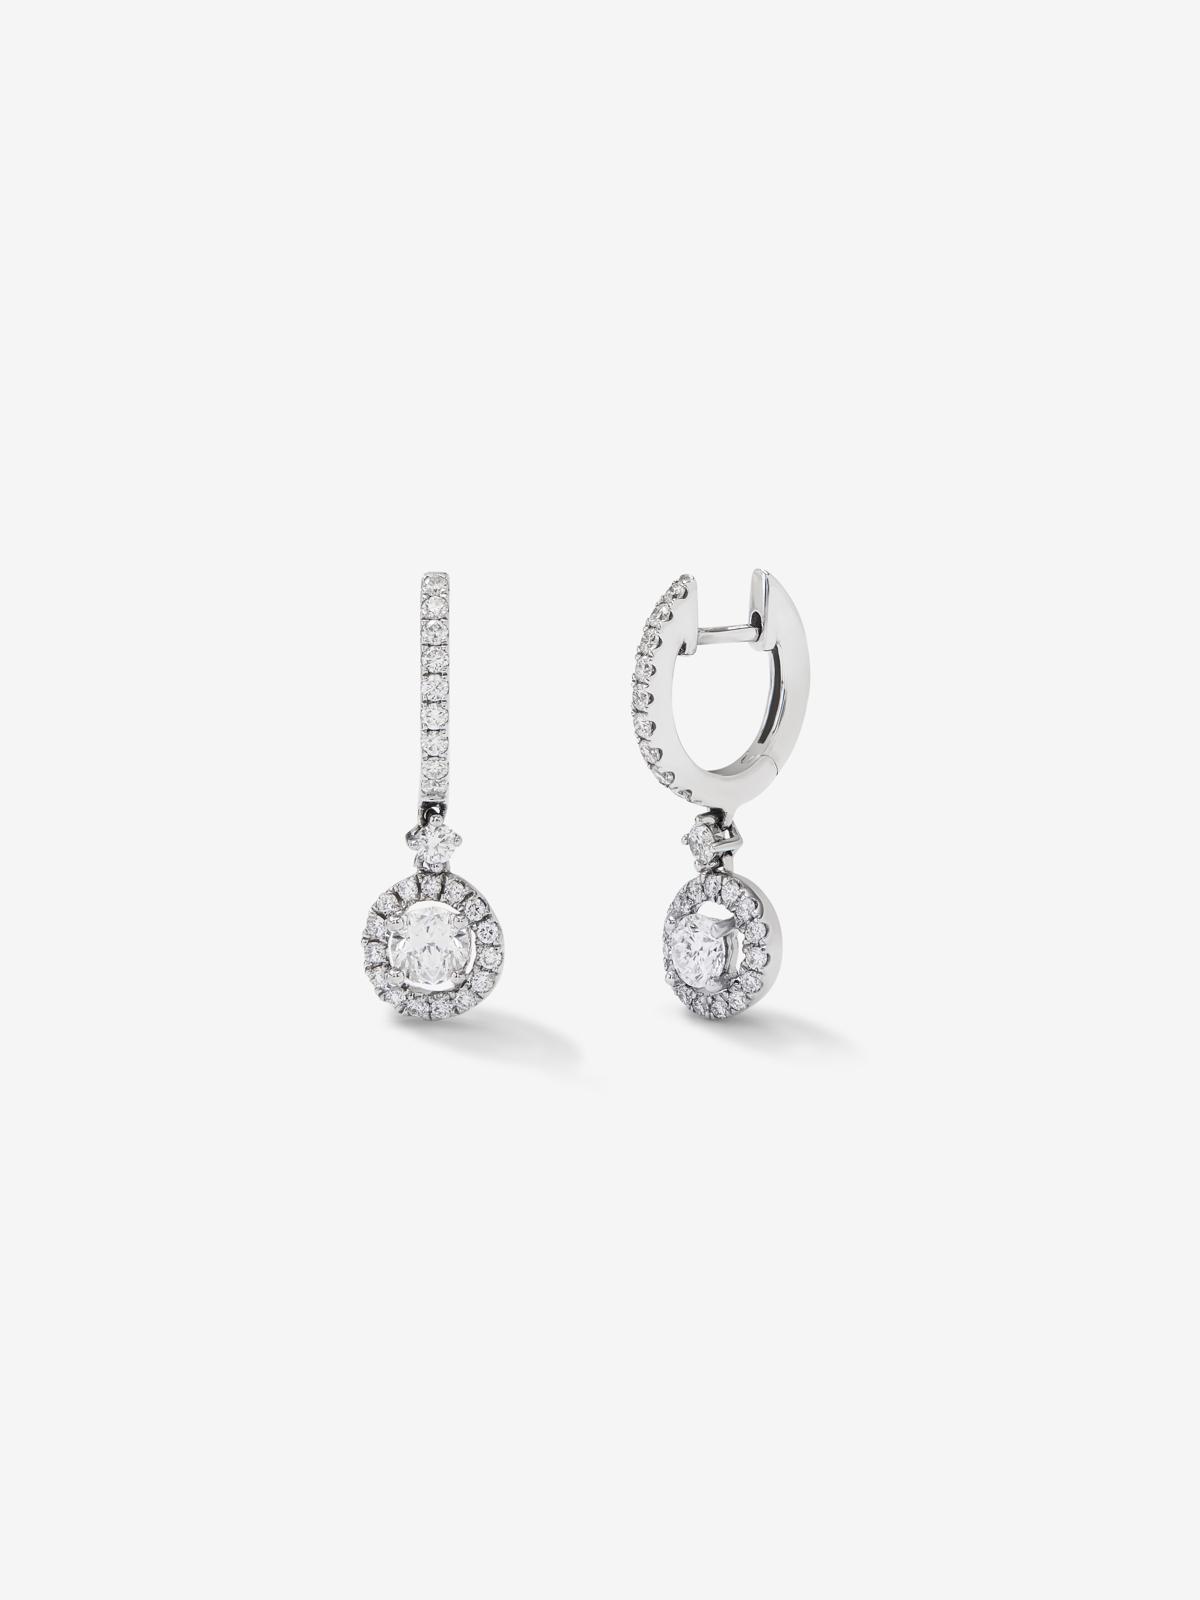 18K white gold earrings with white diamonds of 0.8 cts